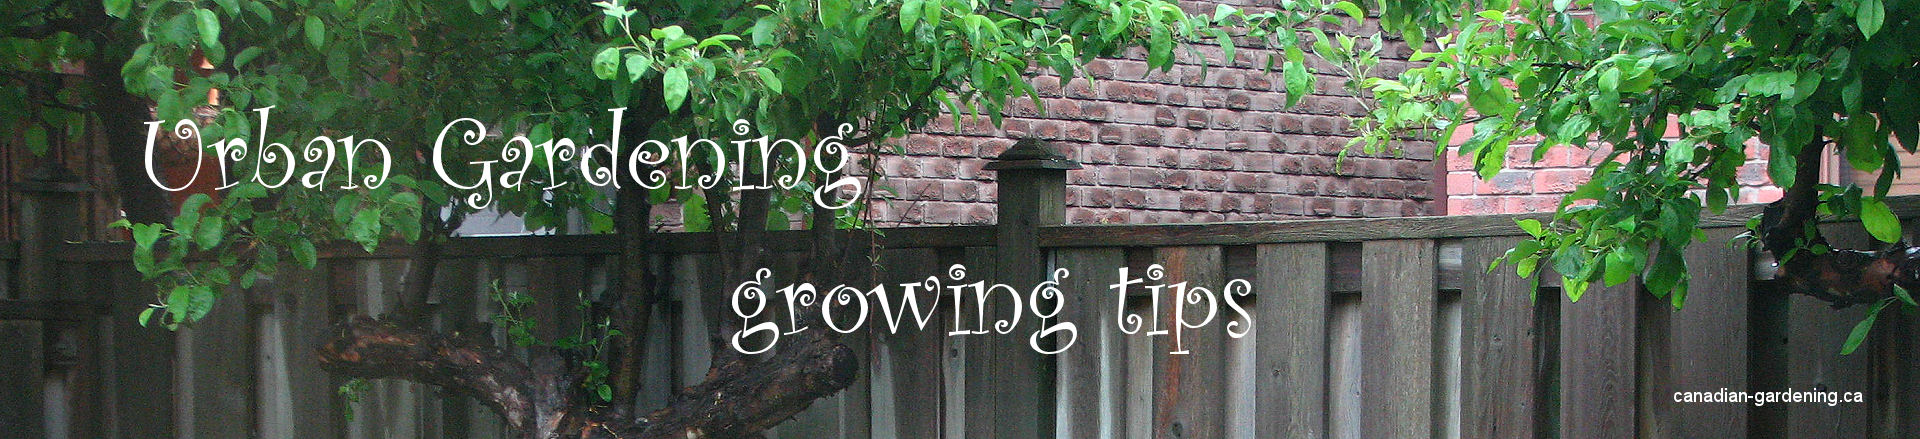 urban gardening growing tips for food and flowers logo